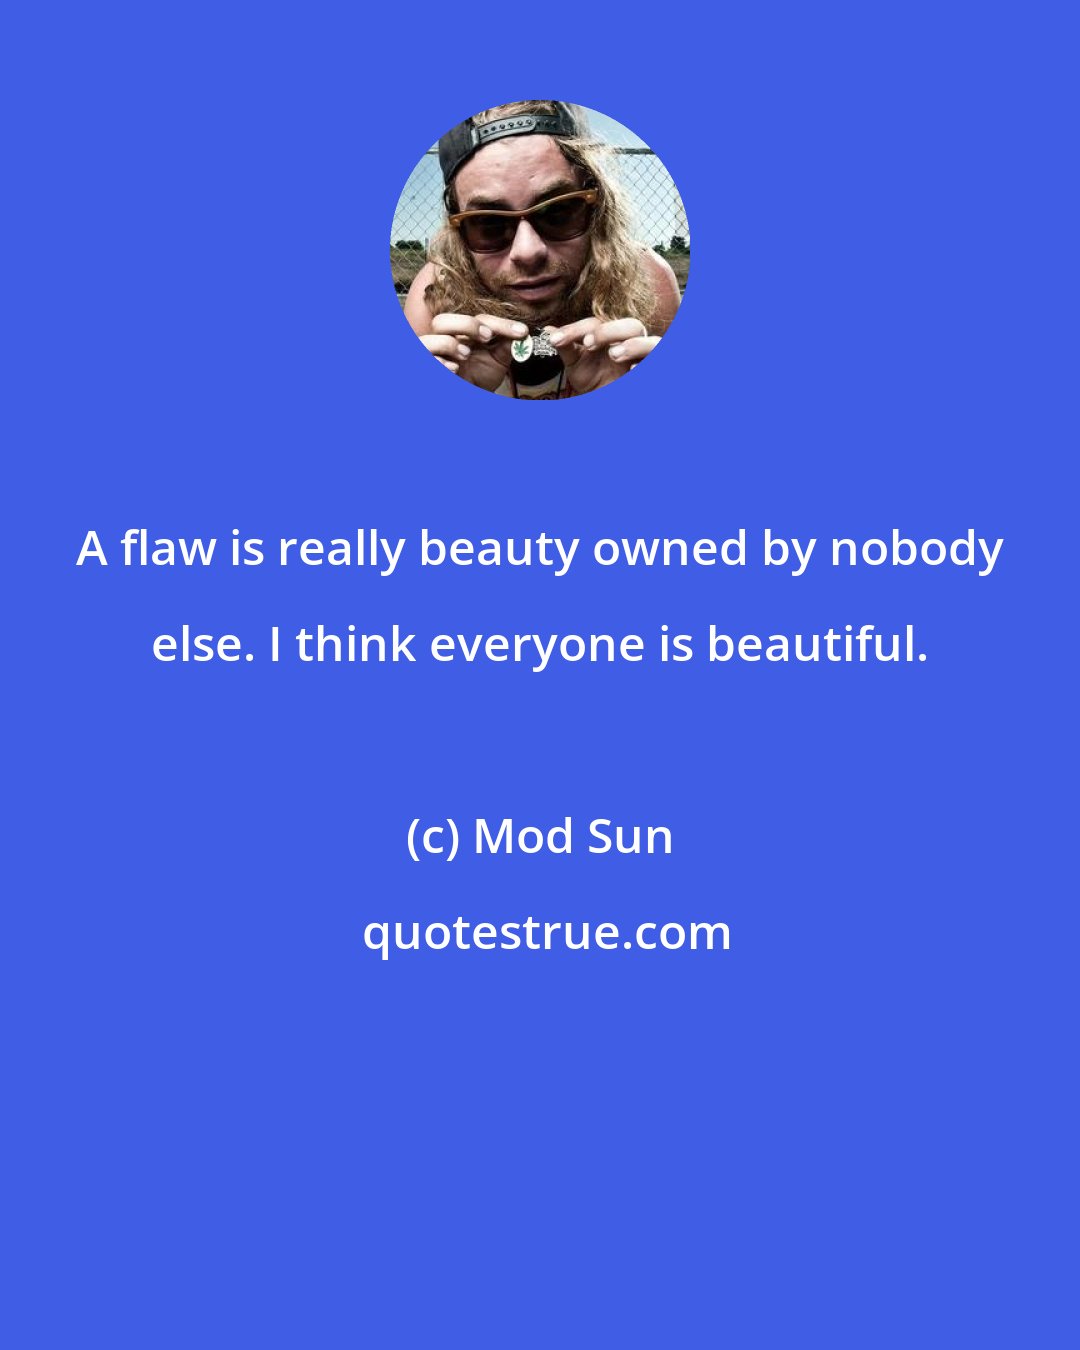 Mod Sun: A flaw is really beauty owned by nobody else. I think everyone is beautiful.